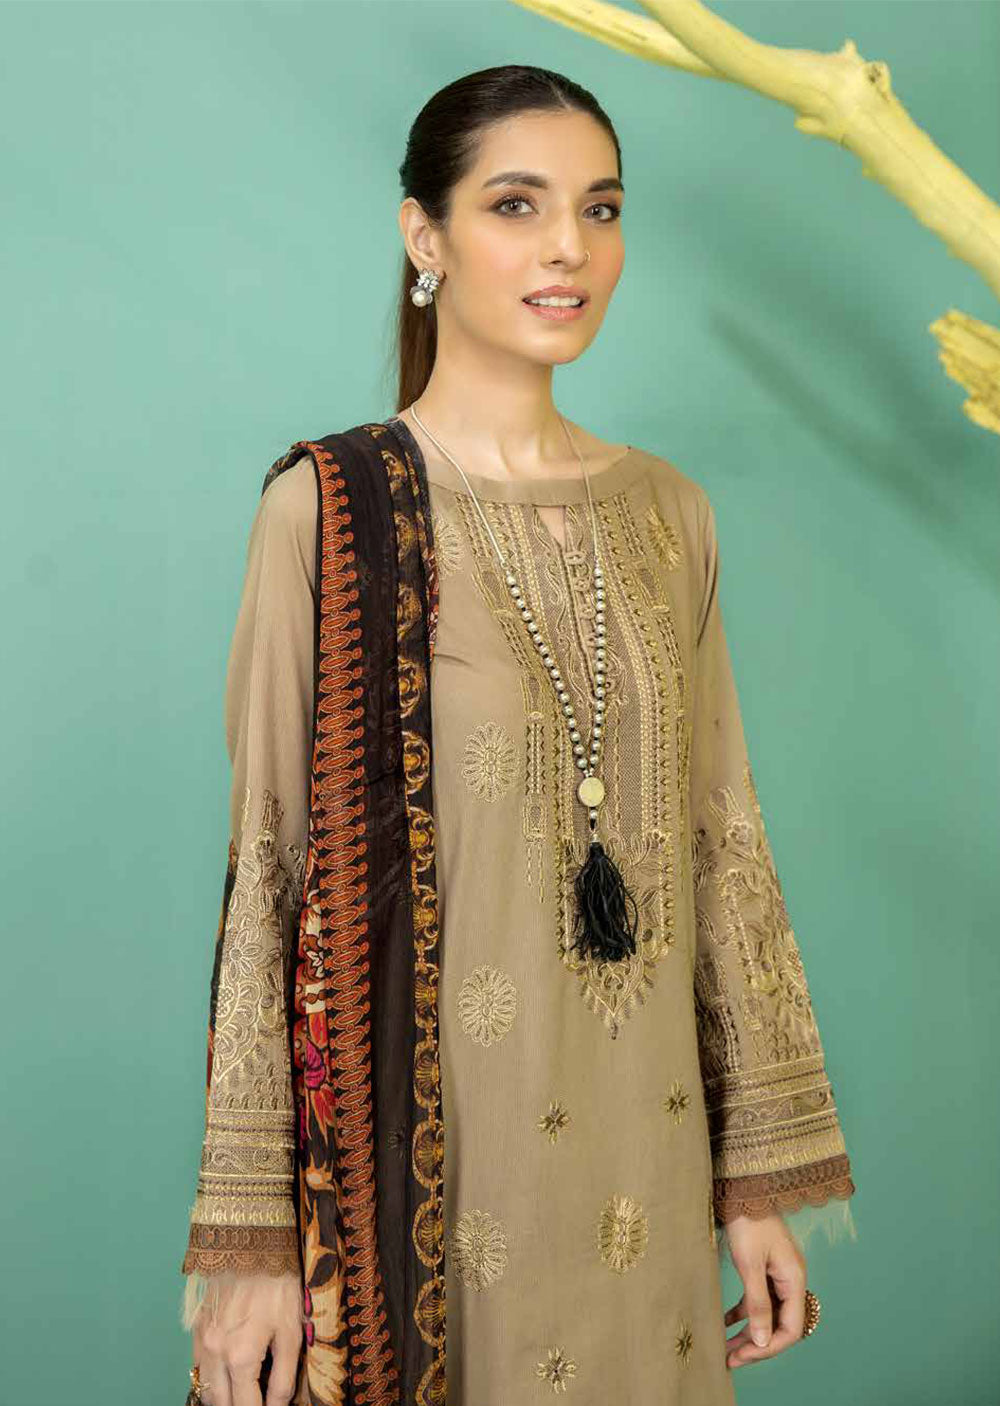 JR-407 - Unstitched - BlueBell Embroidered Cotrai Lawn Collection By Johra 2022 - Memsaab Online